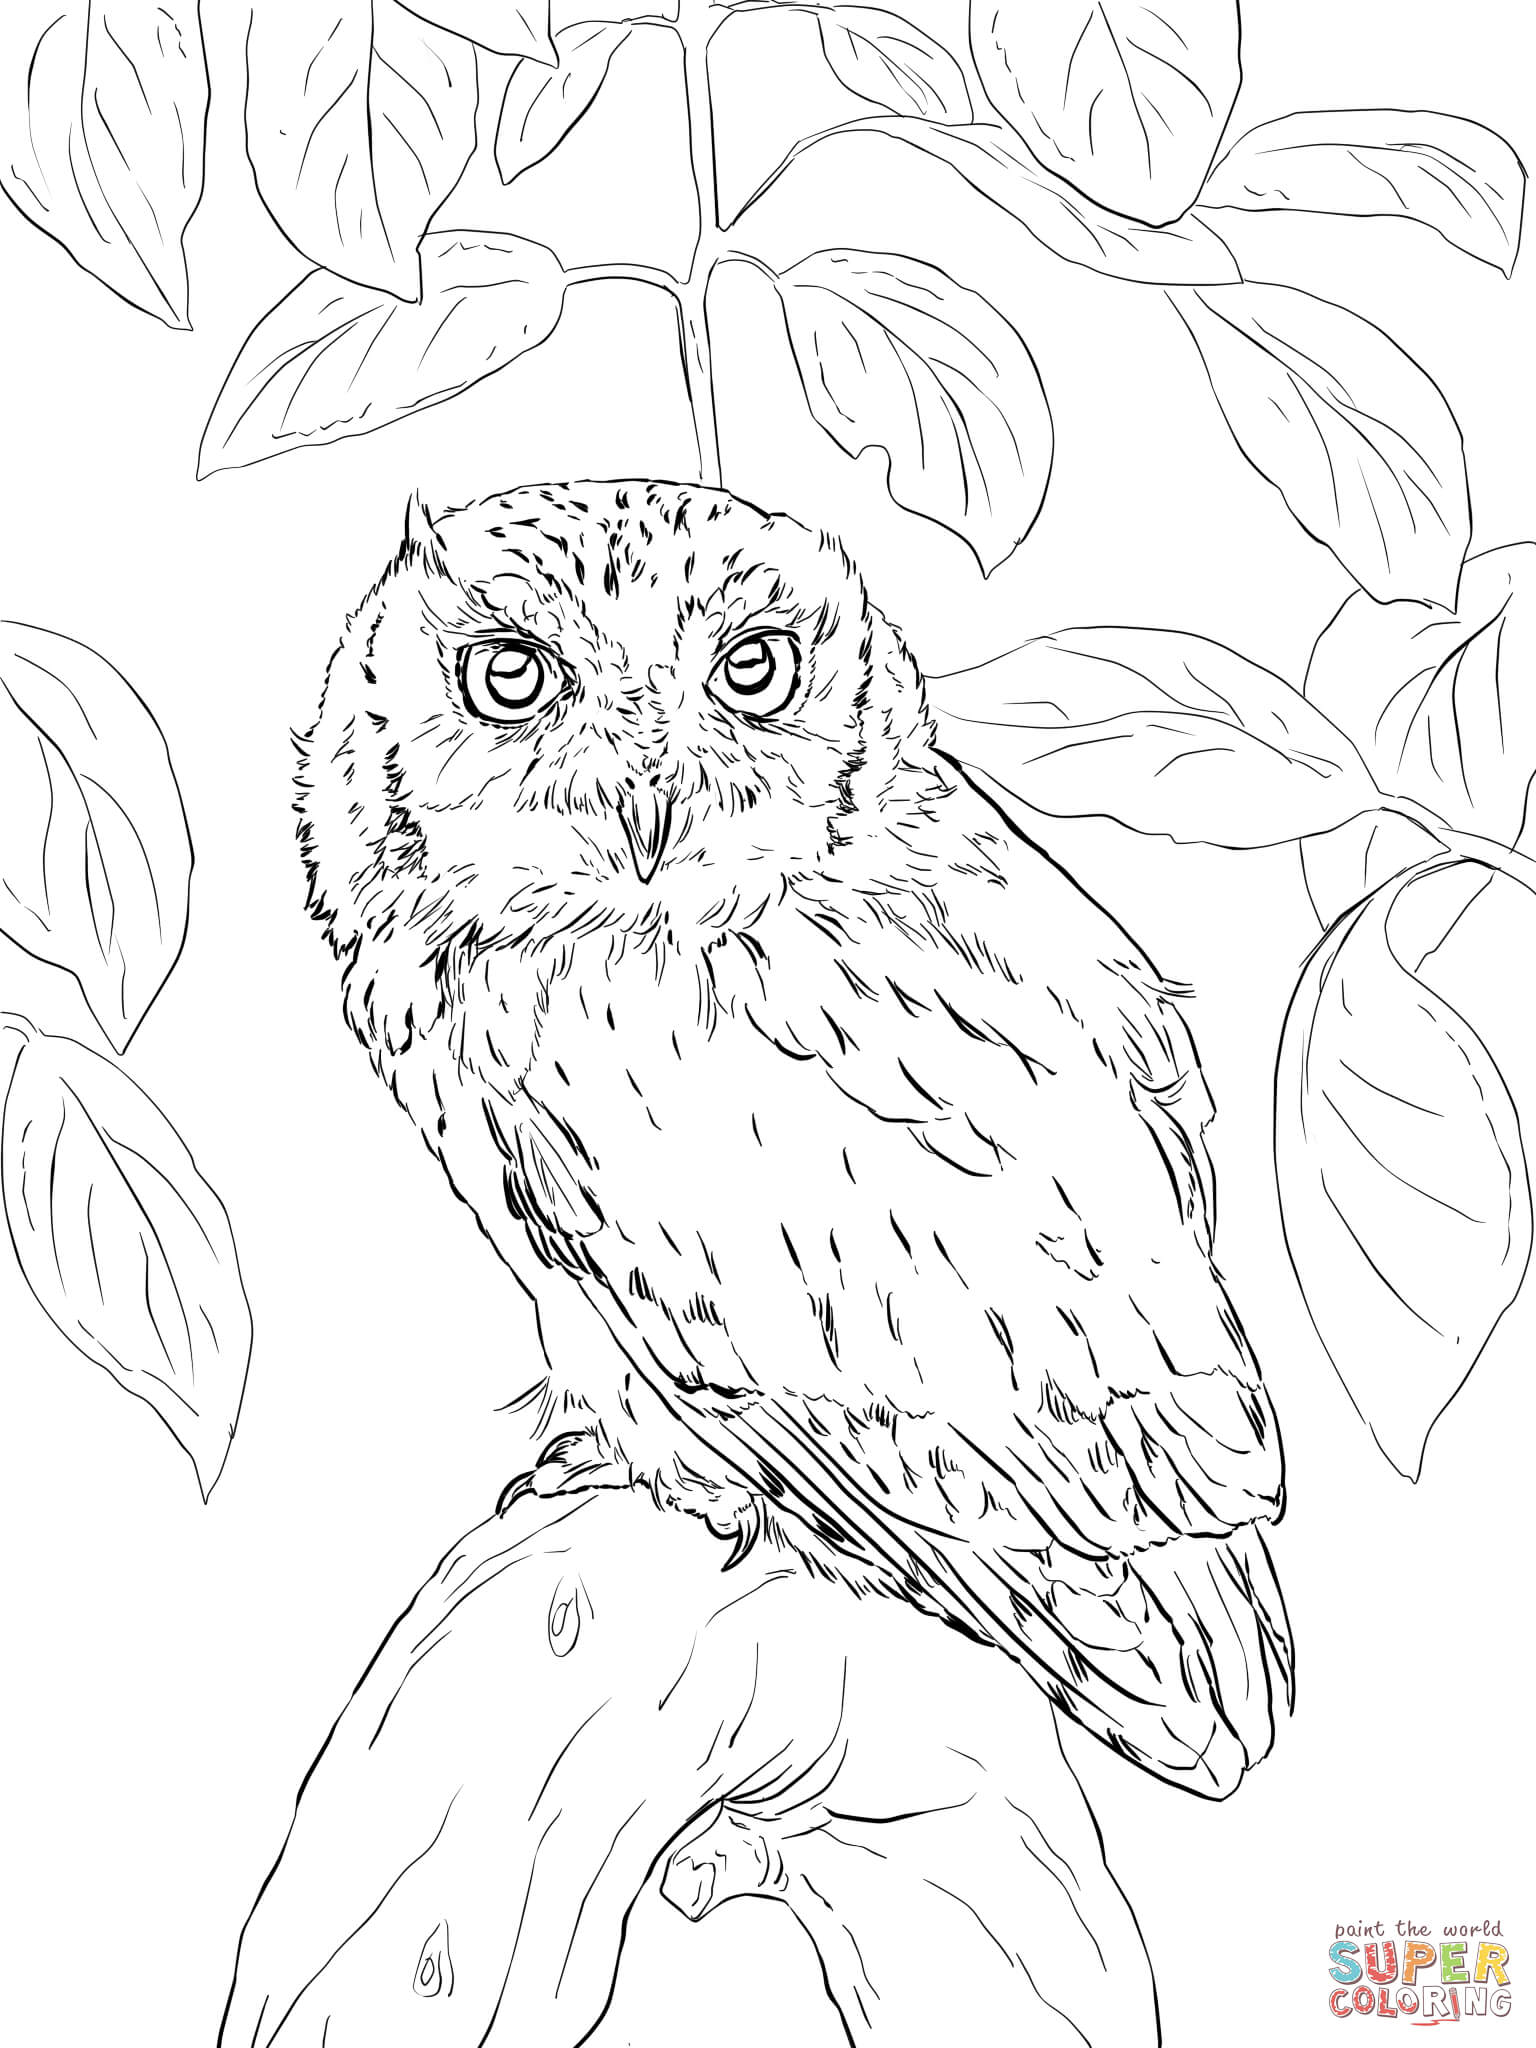 Detailed Owl Coloring Pages at GetColorings.com | Free printable